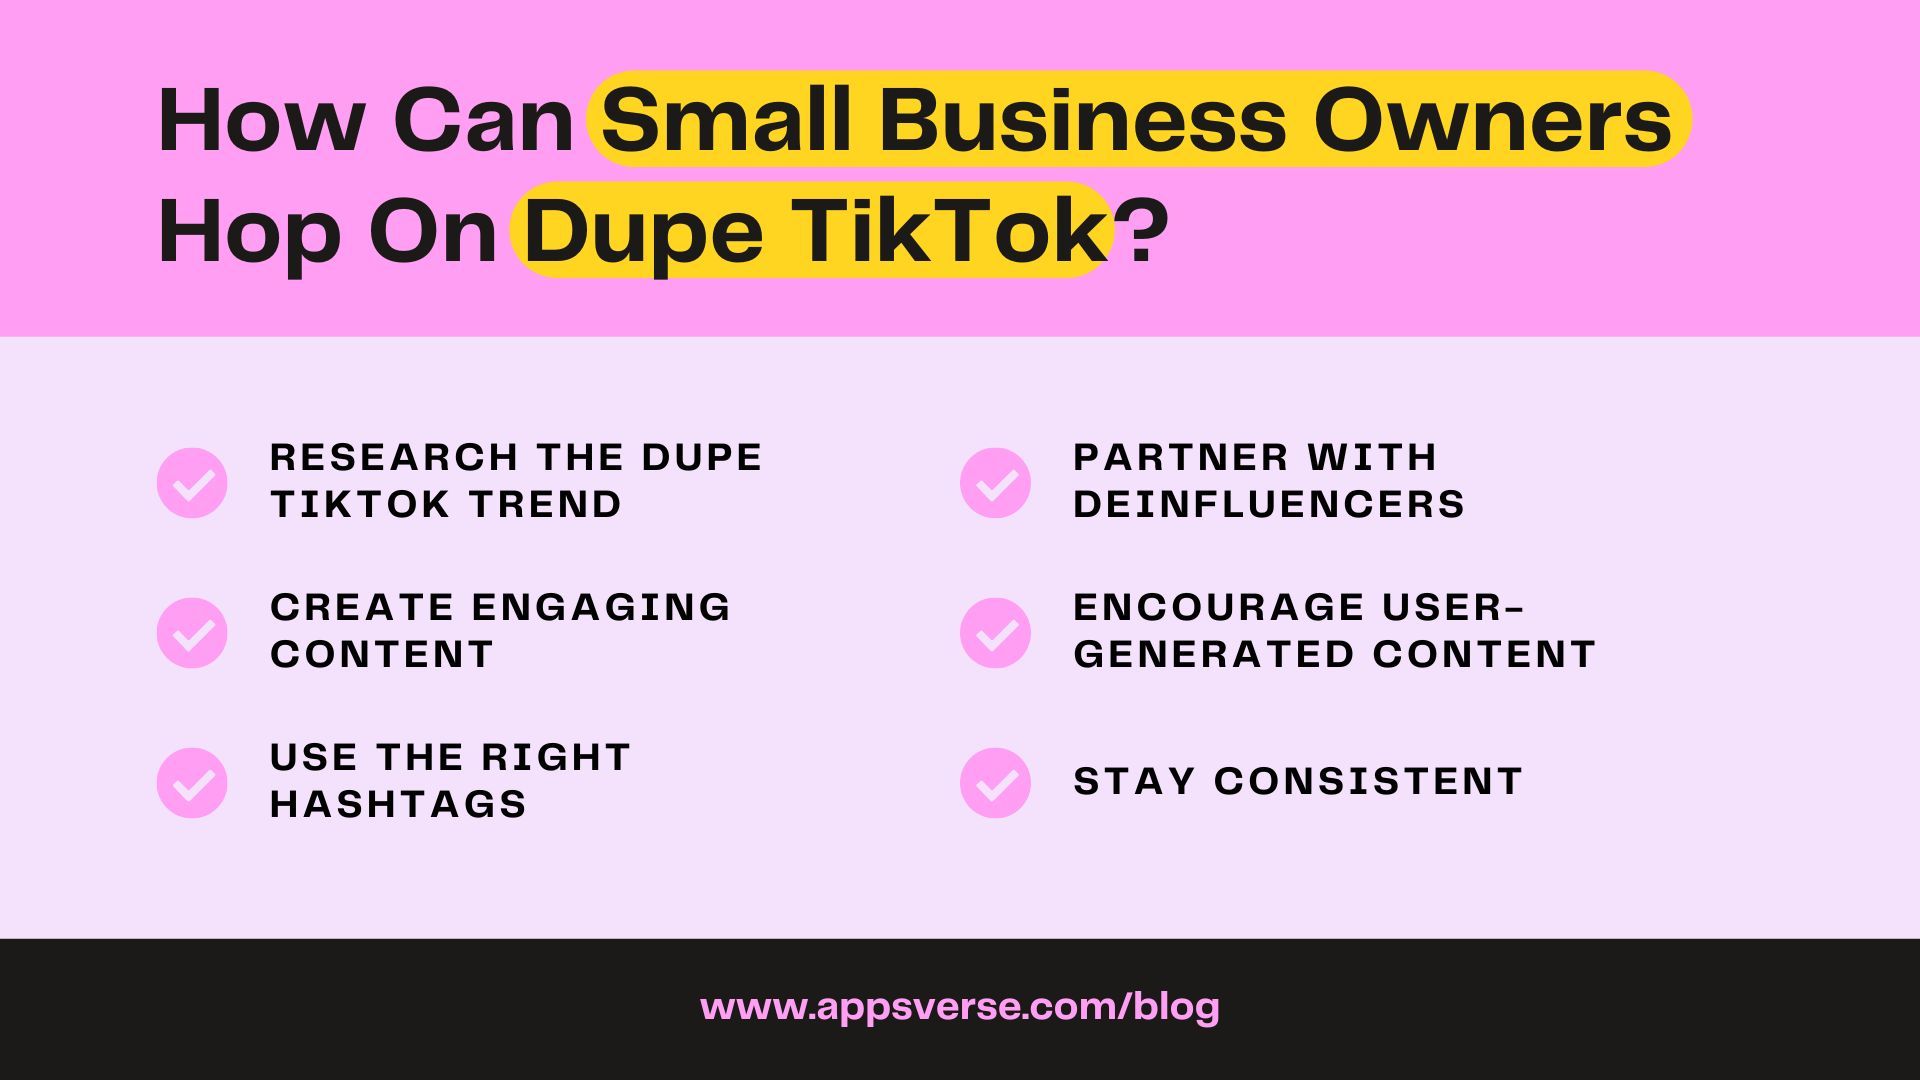 Dupe TikTok: A Cost-Effective Marketing Strategy for Small Businesses